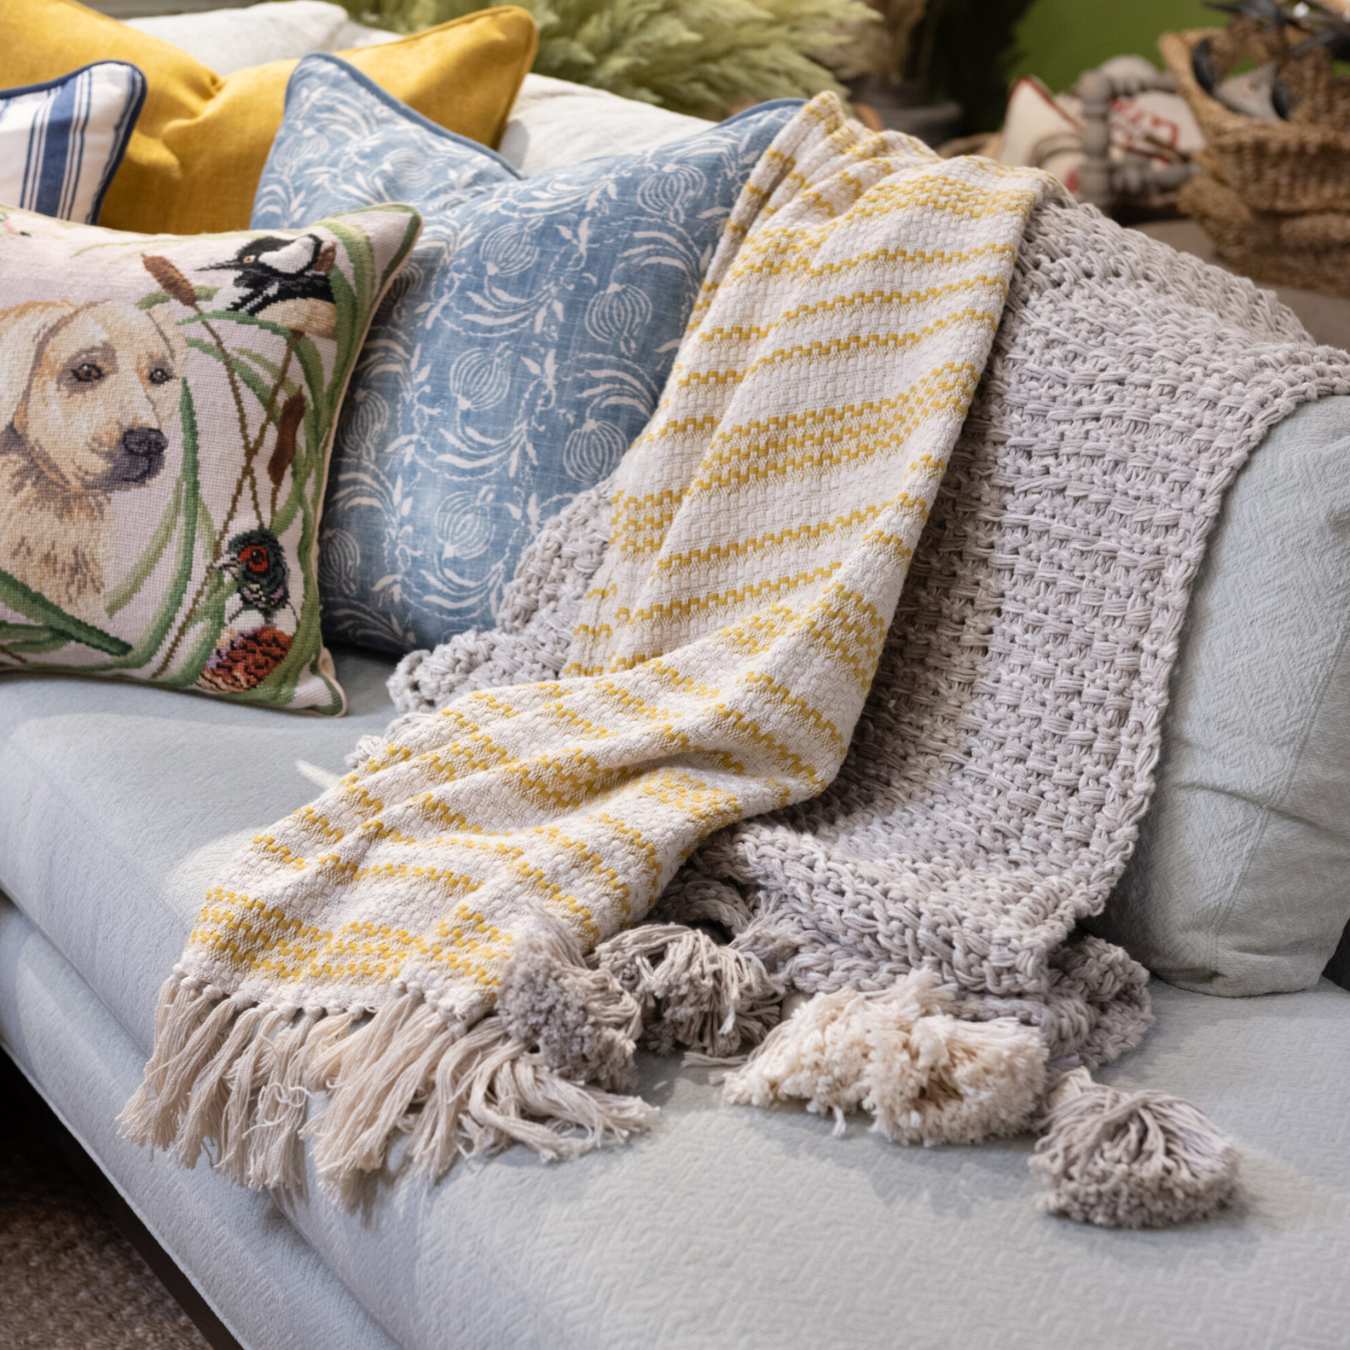 Cozy and Stylish Throw Blanket: A Must-Have for Her